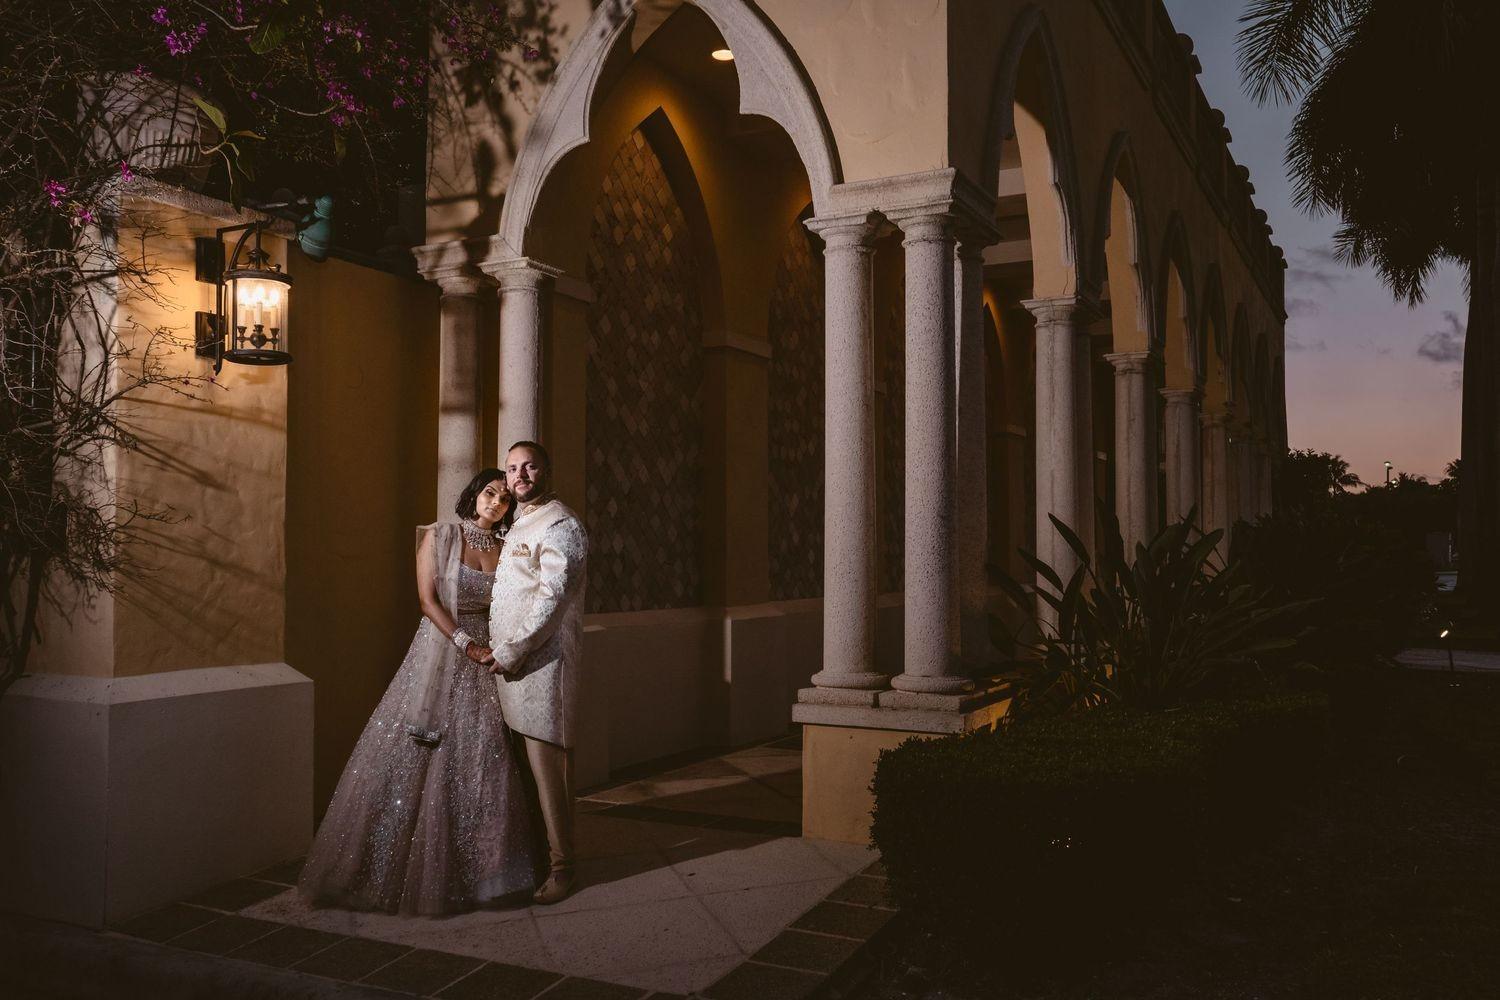 Why You Should Hire a Professional Wedding Photographer